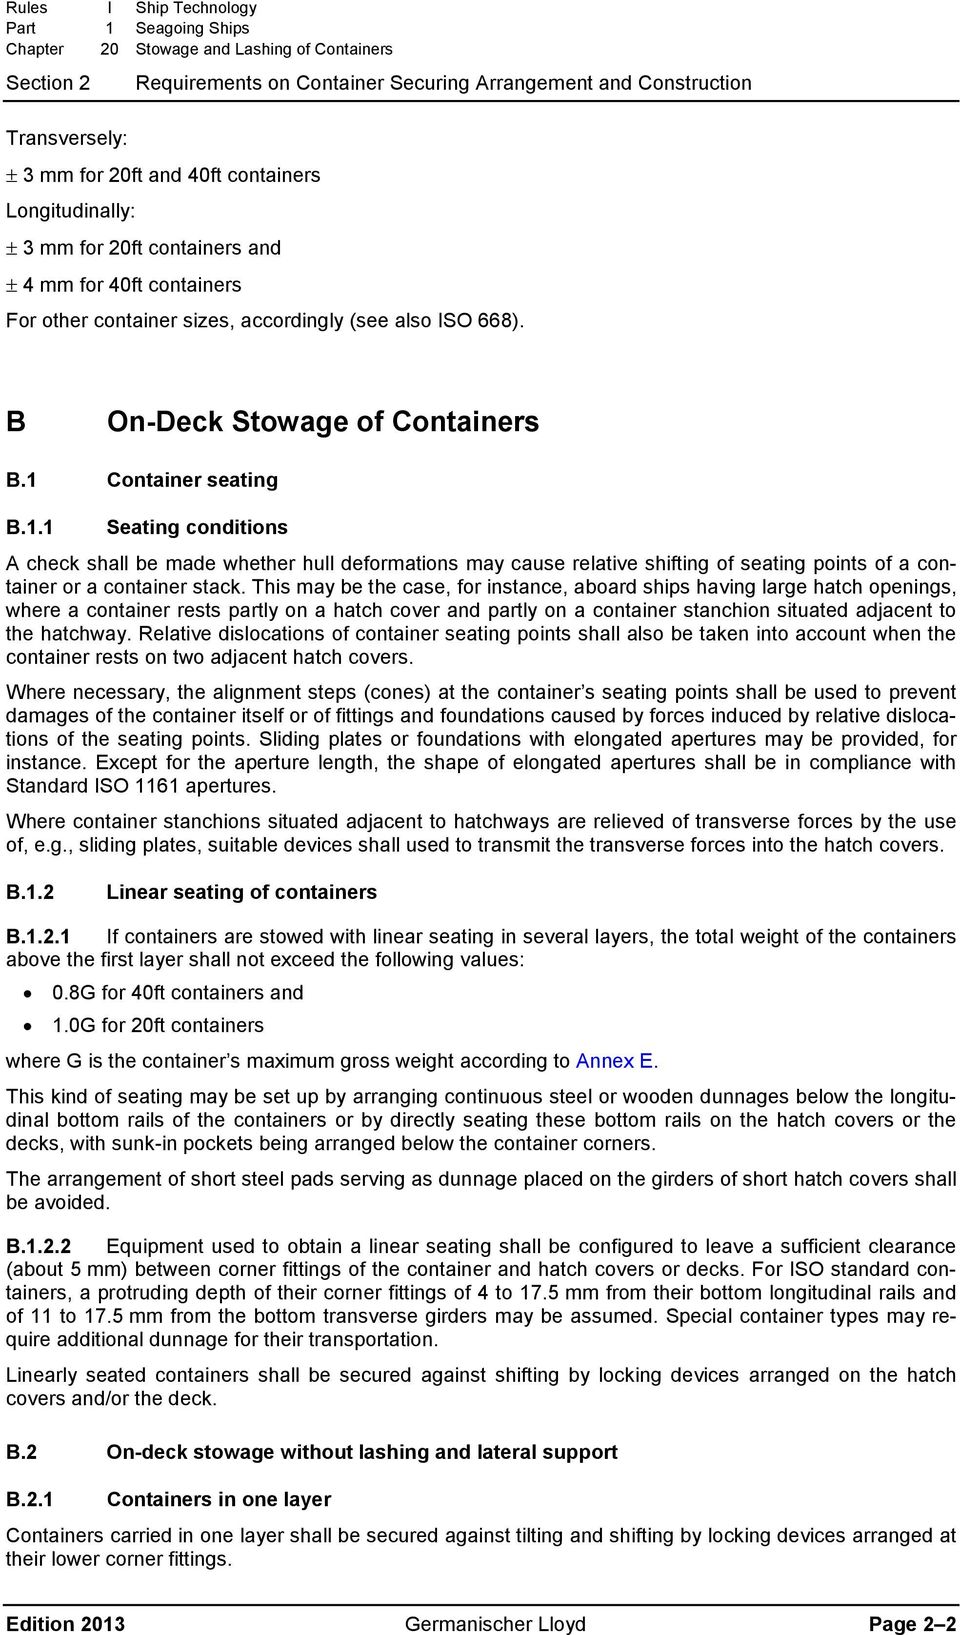 Container seating B.1.1 Seating conditions A check shall be made whether hull deformations may cause relative shifting of seating points of a container or a container stack.